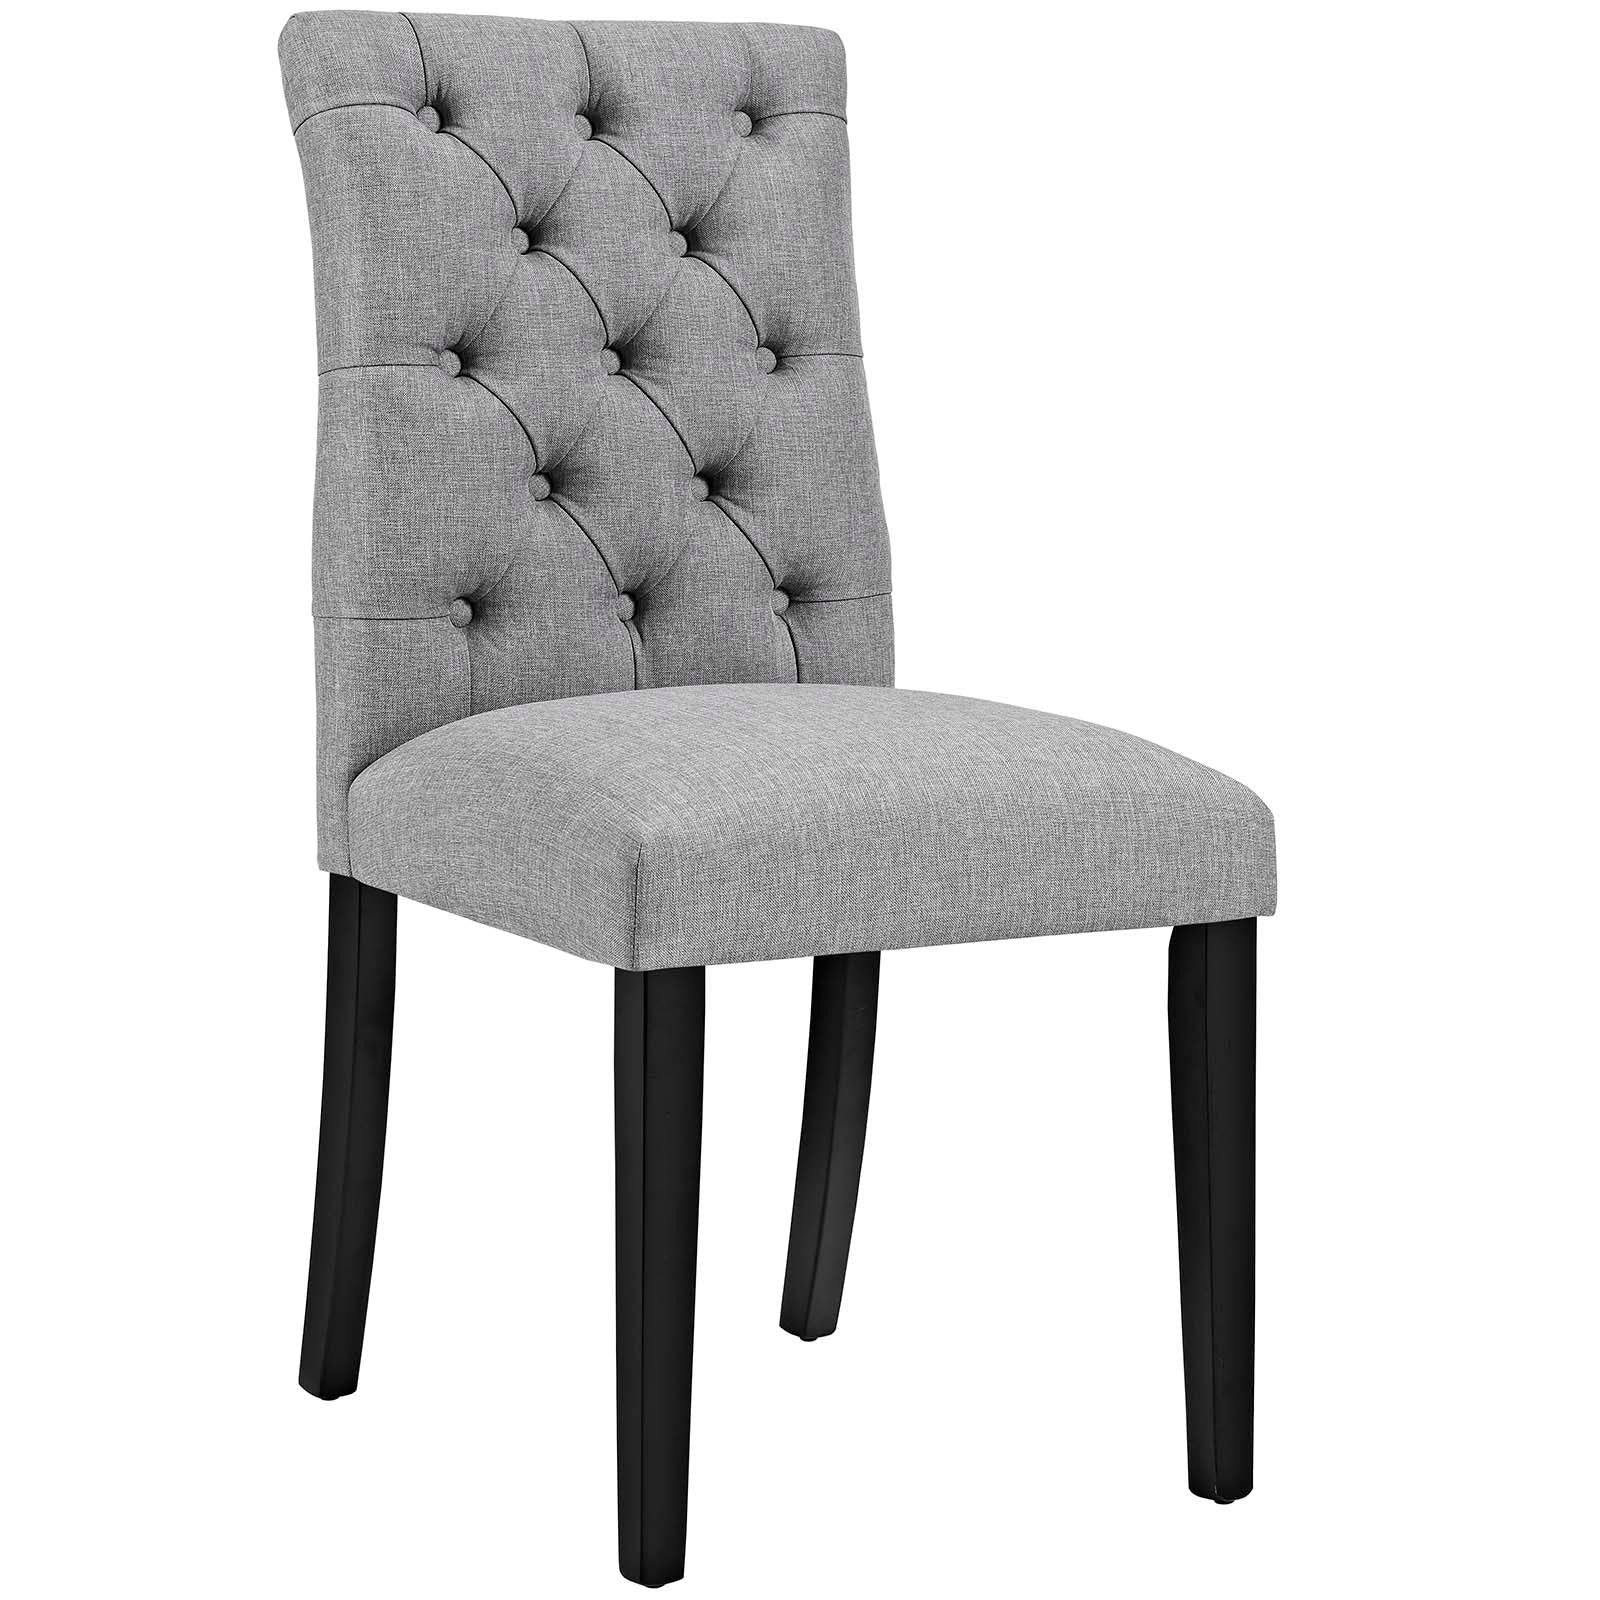 Modway Dining Chairs - Duchess Dining Chair Fabric Light Gray (Set of 2)